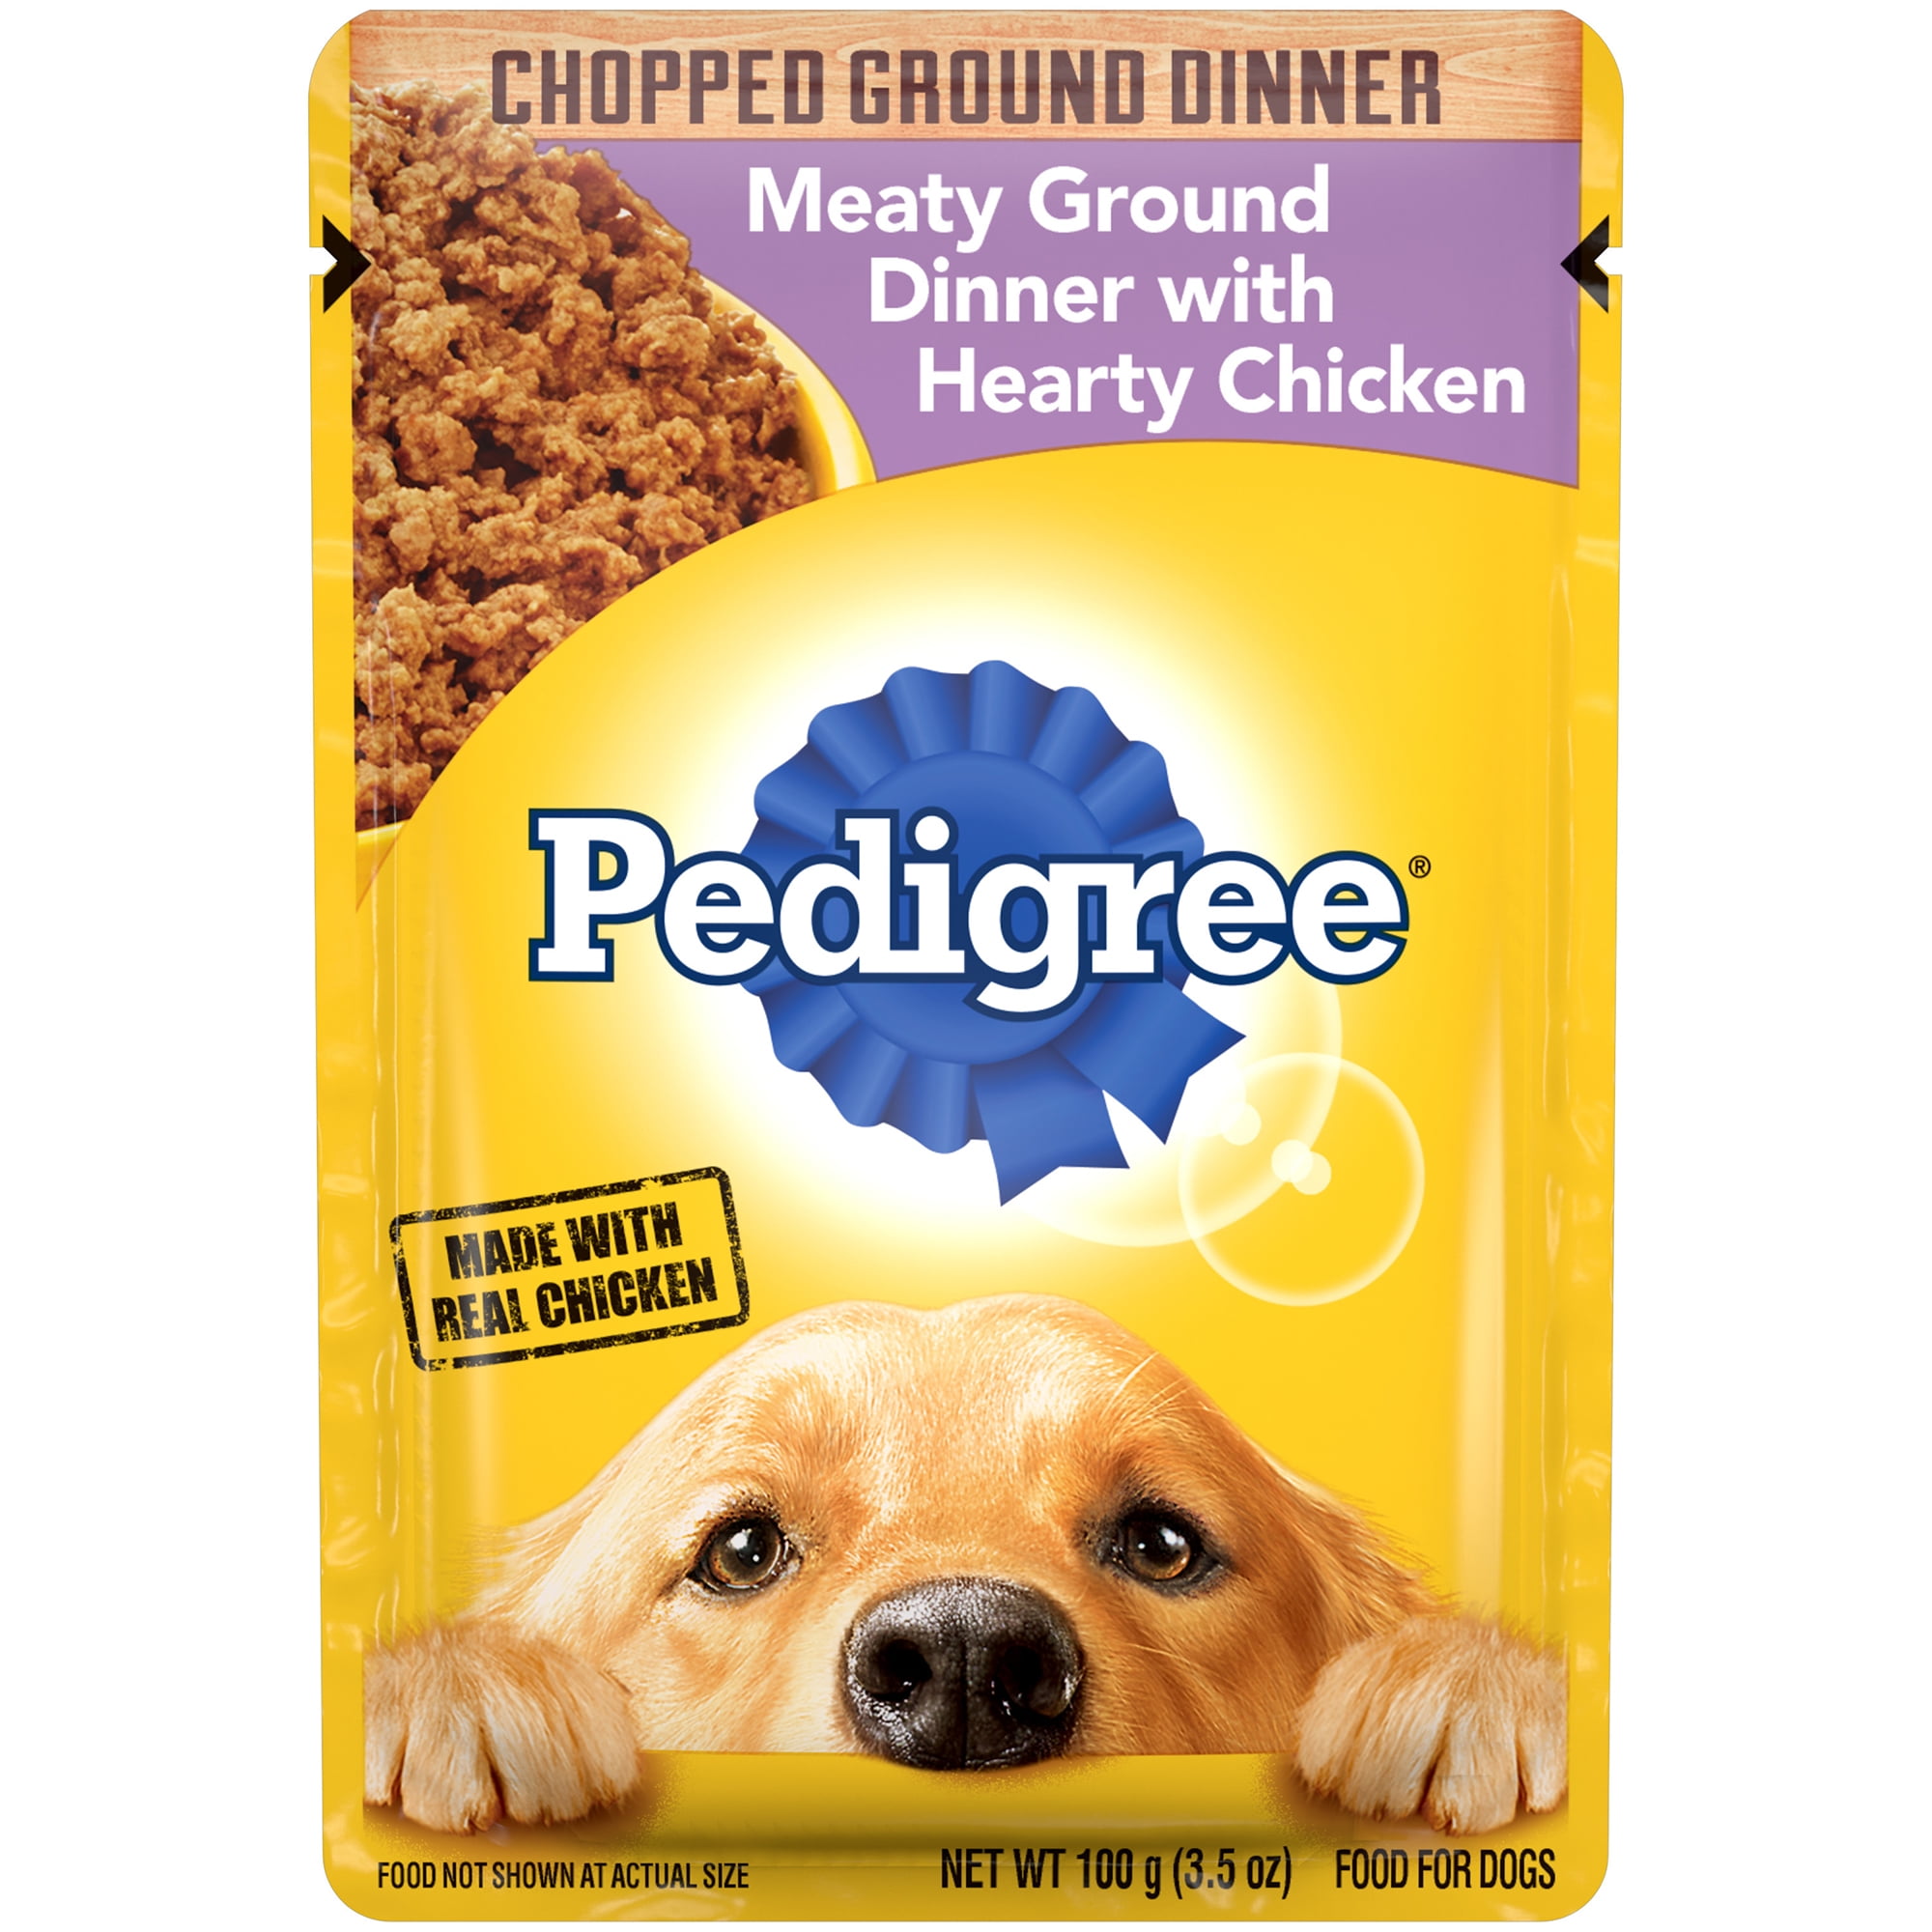 Pedigree Chopped Ground Dinner Wet Dog Food for Adult Dog With Hearty Chicken, 3.5 oz Pouches